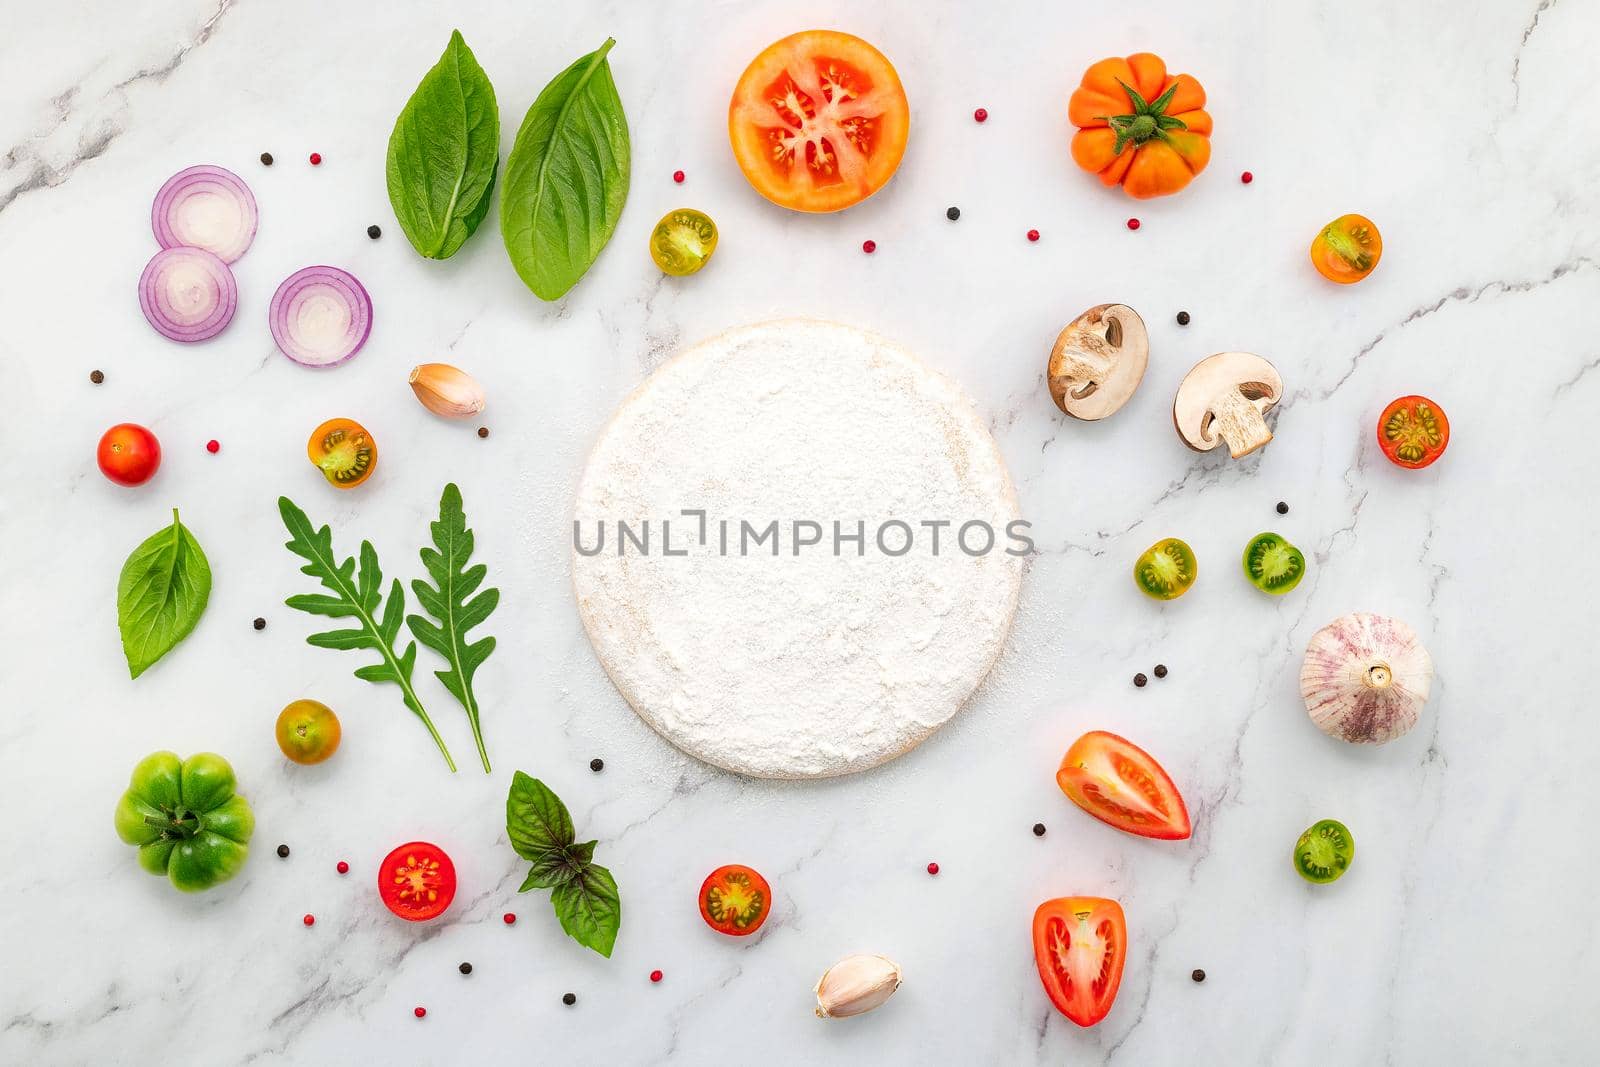 The ingredients for homemade pizza set up on white marble background with copy space and top view. by kerdkanno